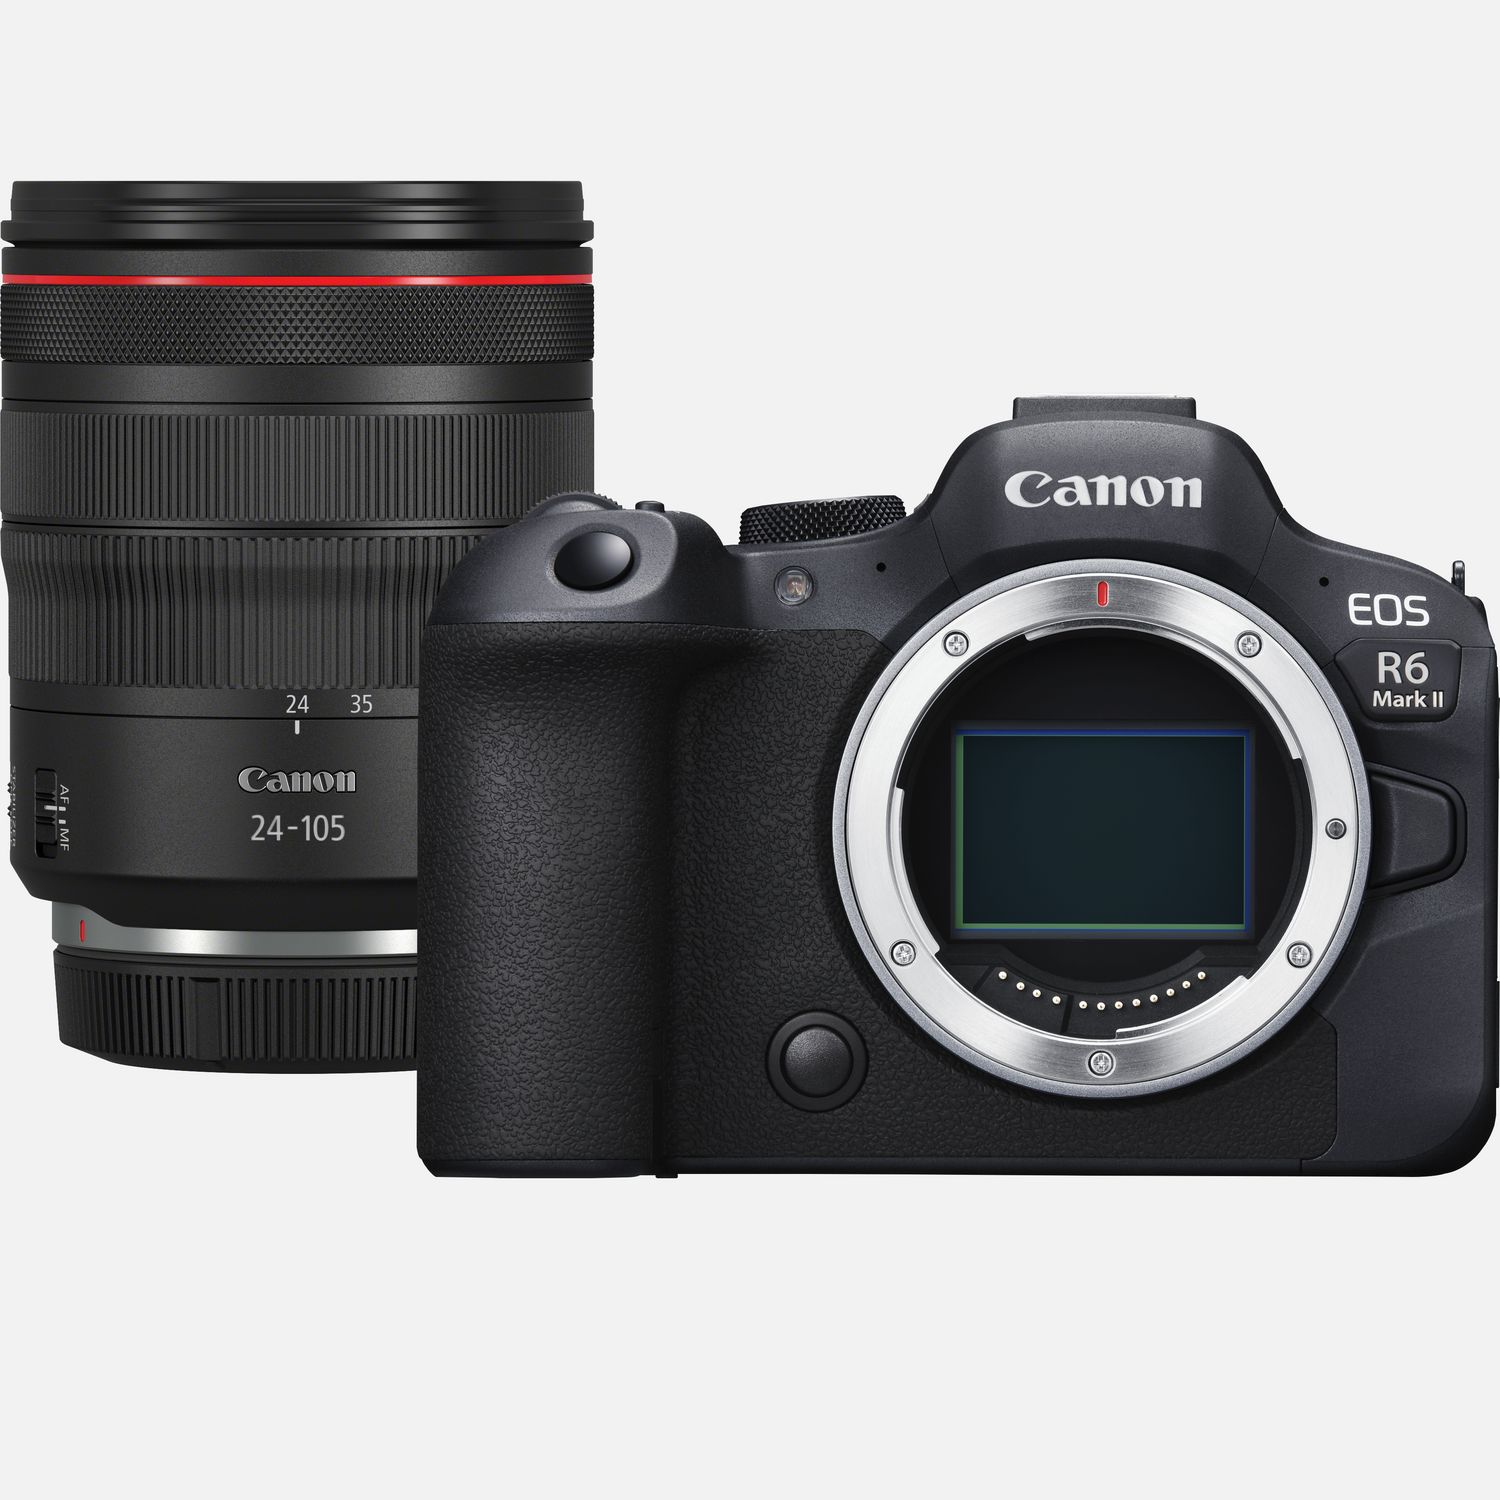 Buy Canon EOS R6 Mark II Mirrorless Camera + RF 24-105mm F4L IS USM Lens in  Wi-Fi Cameras — Canon UK Store